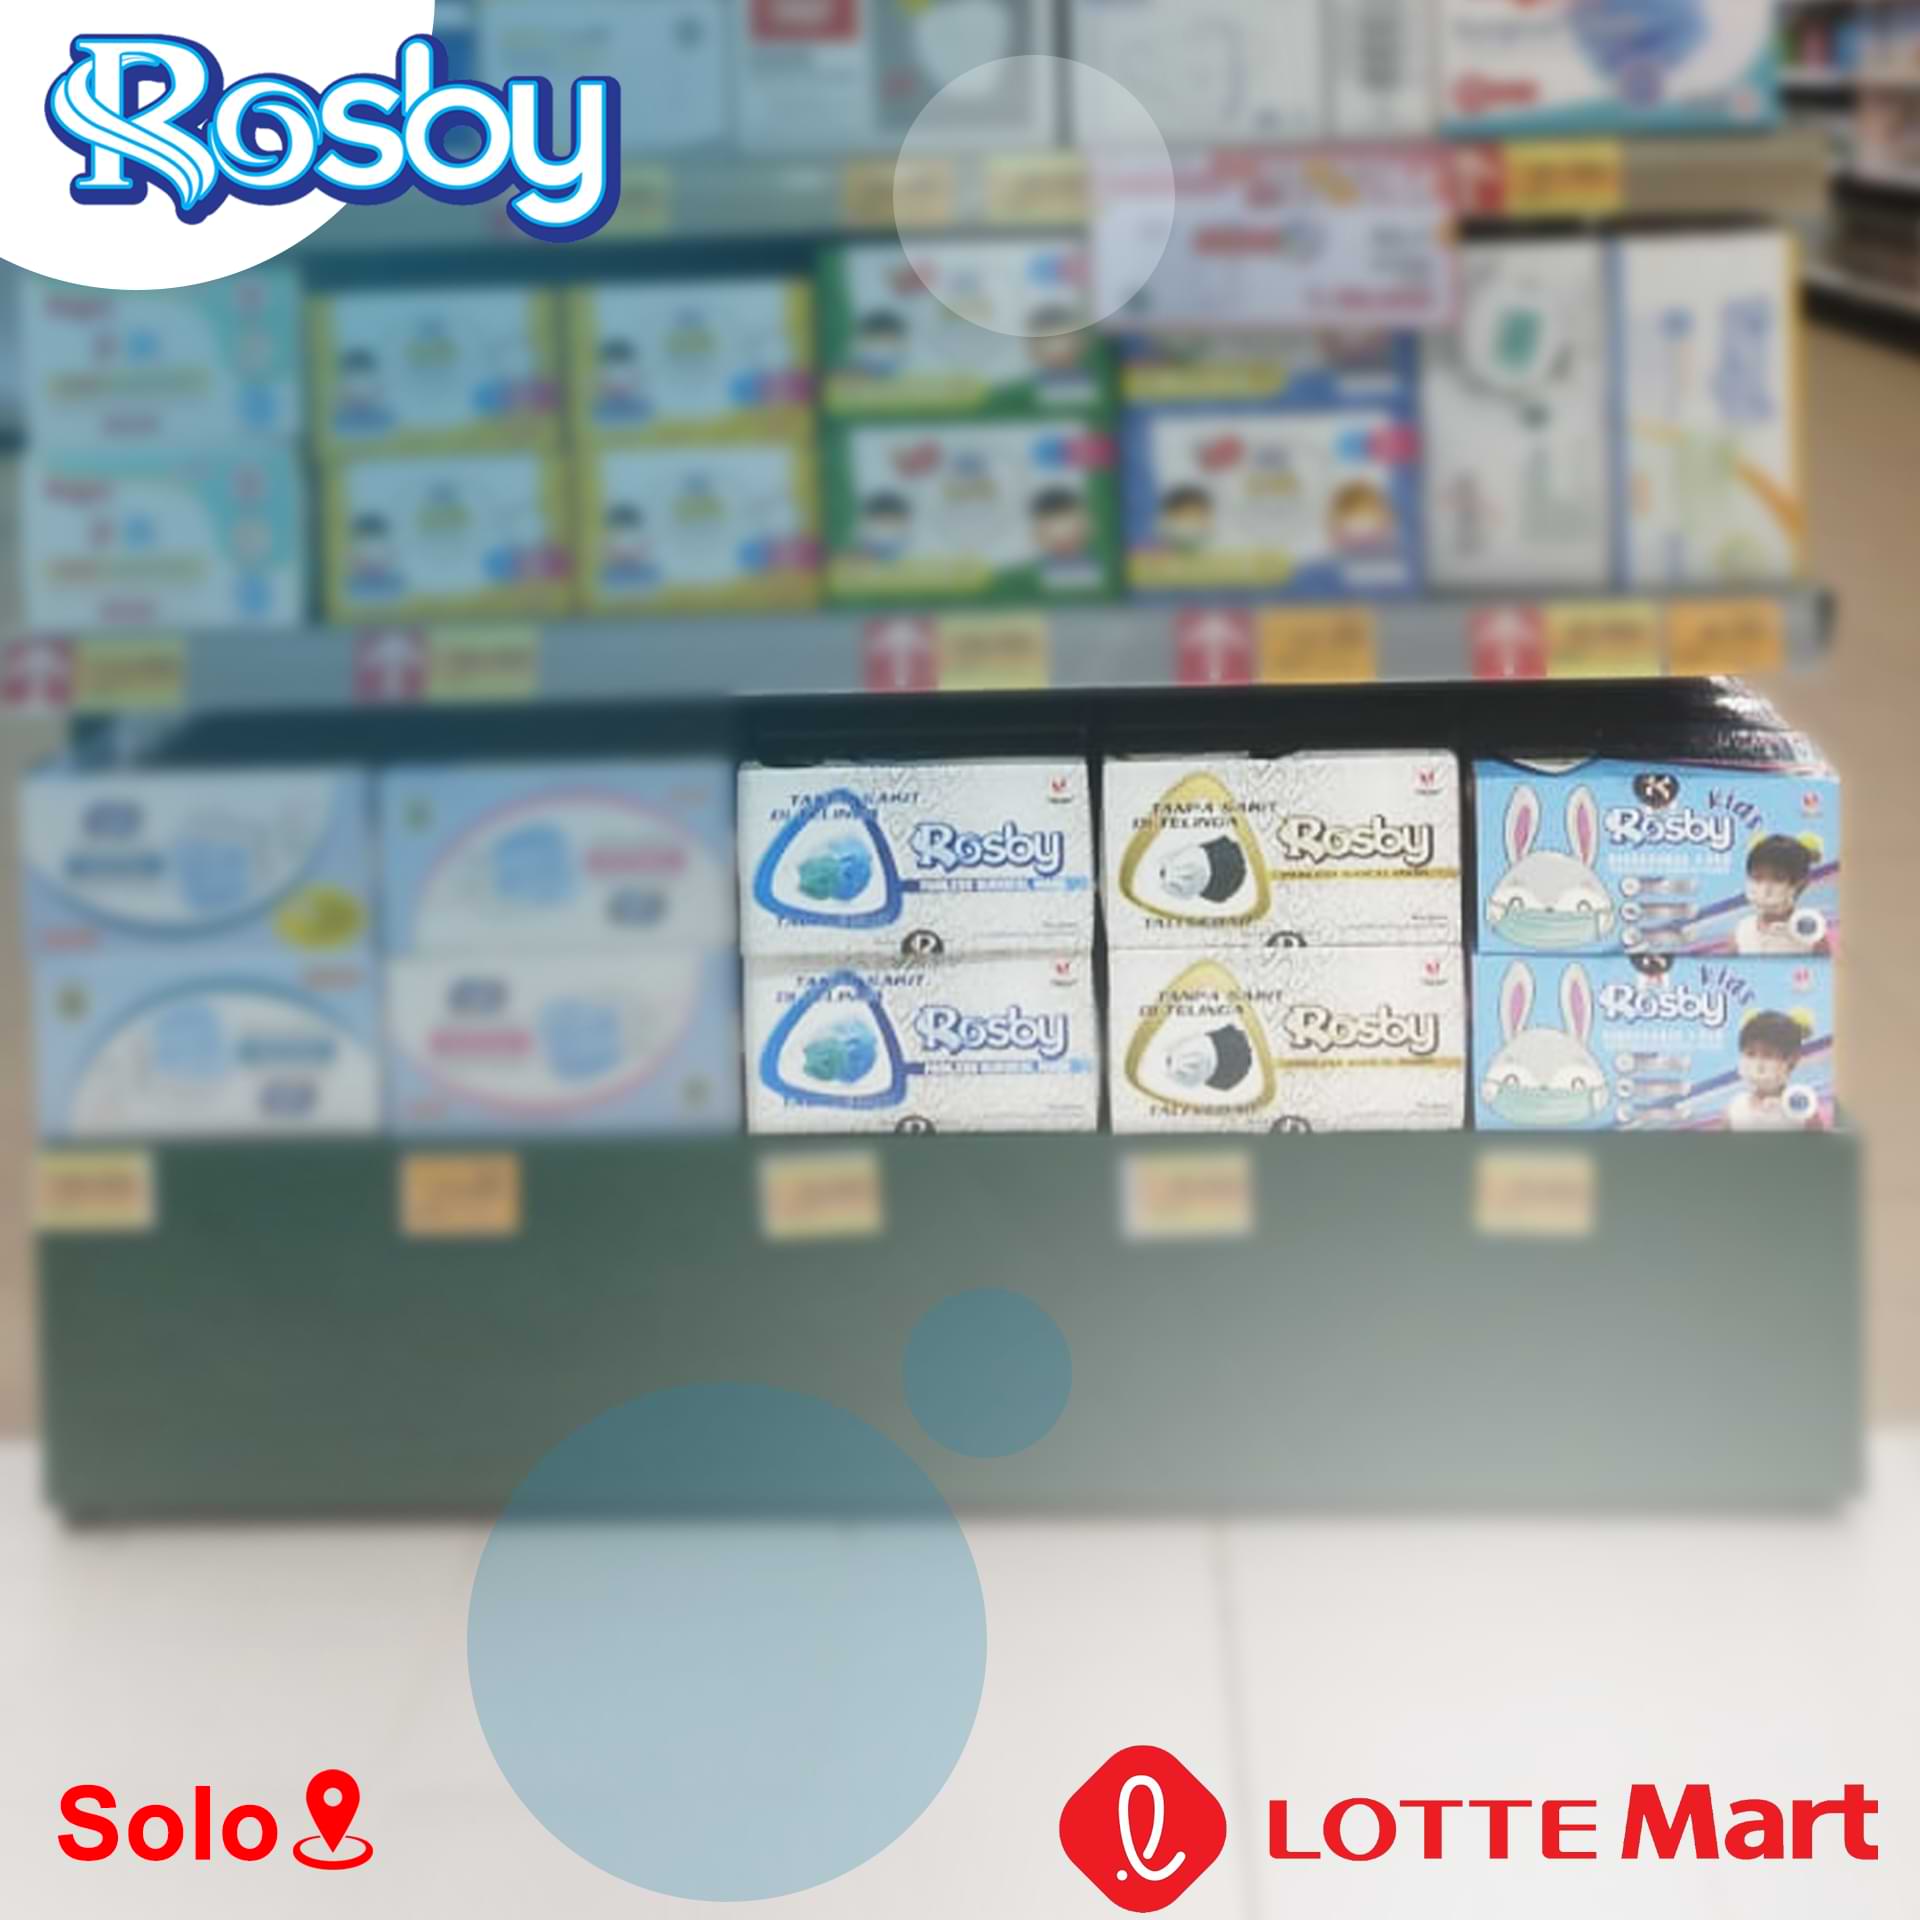 Rosby Indonesia